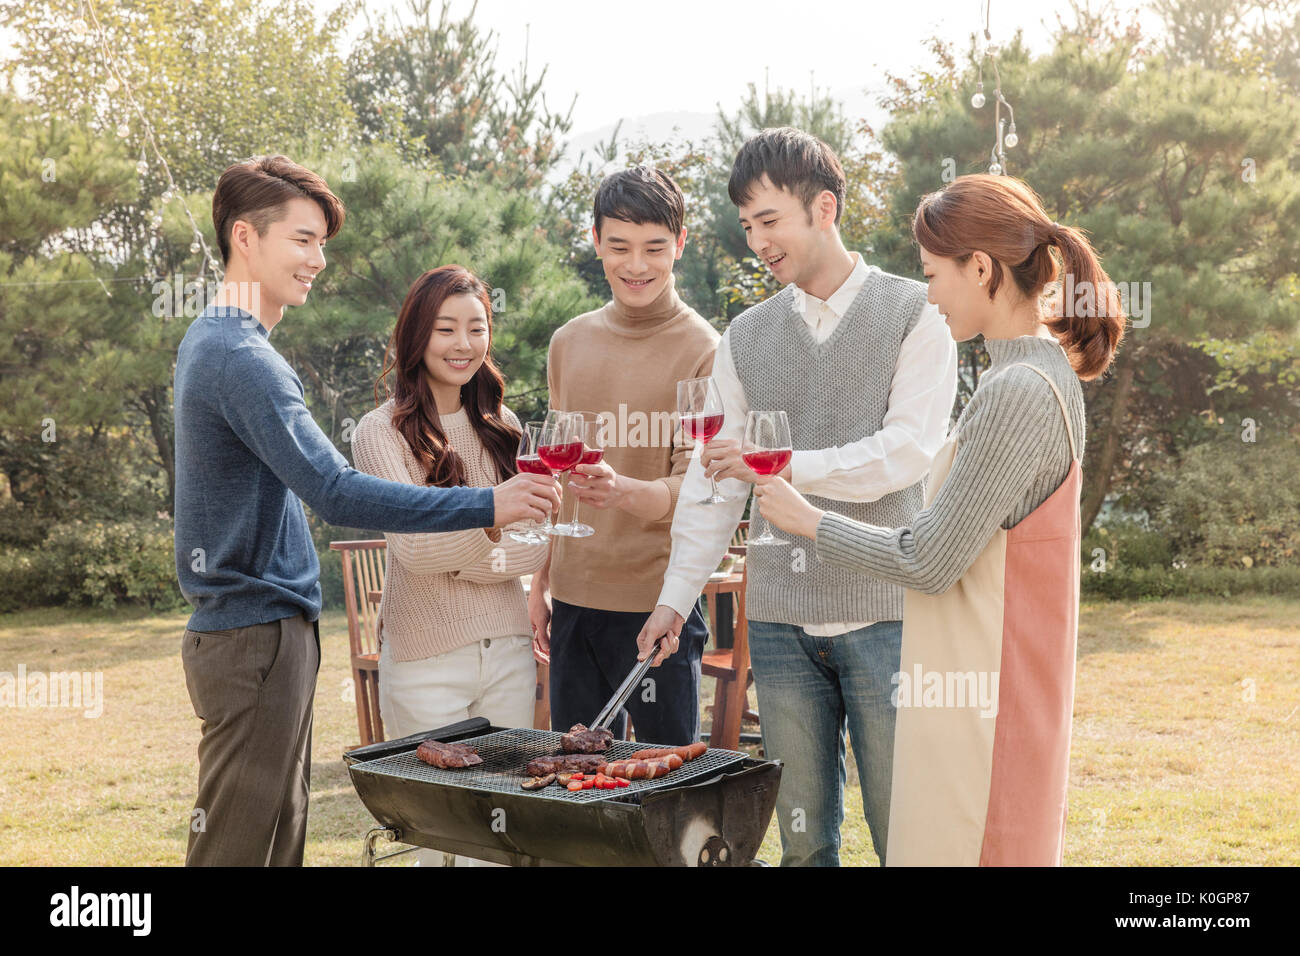 Young smiling friends having a barbecue party Stock Photo